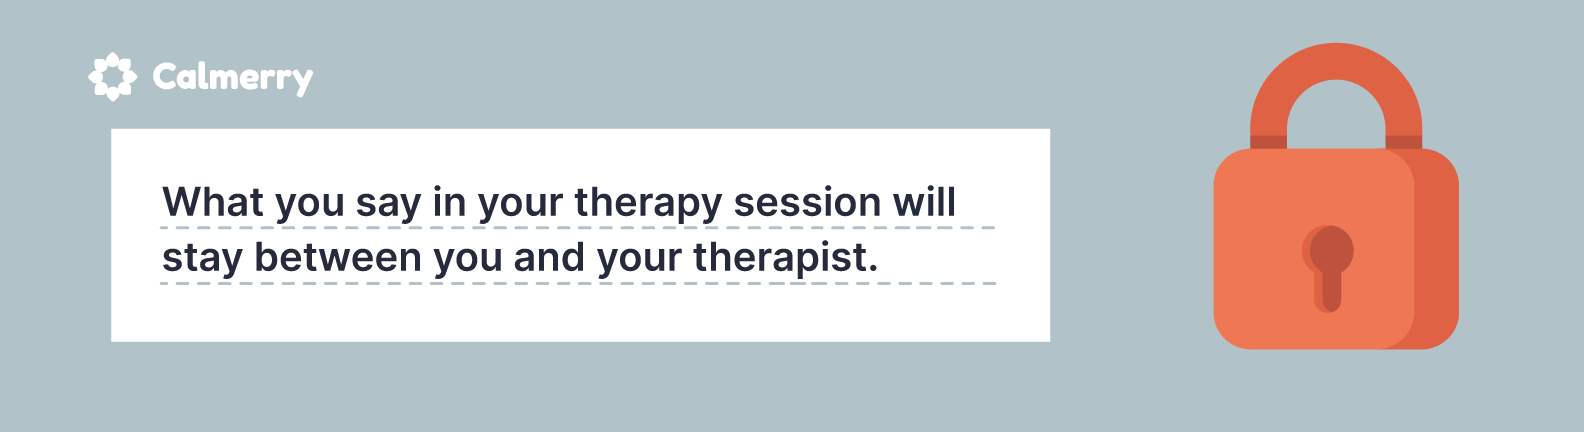 What you say in your therapy session will stay between you and your therapist